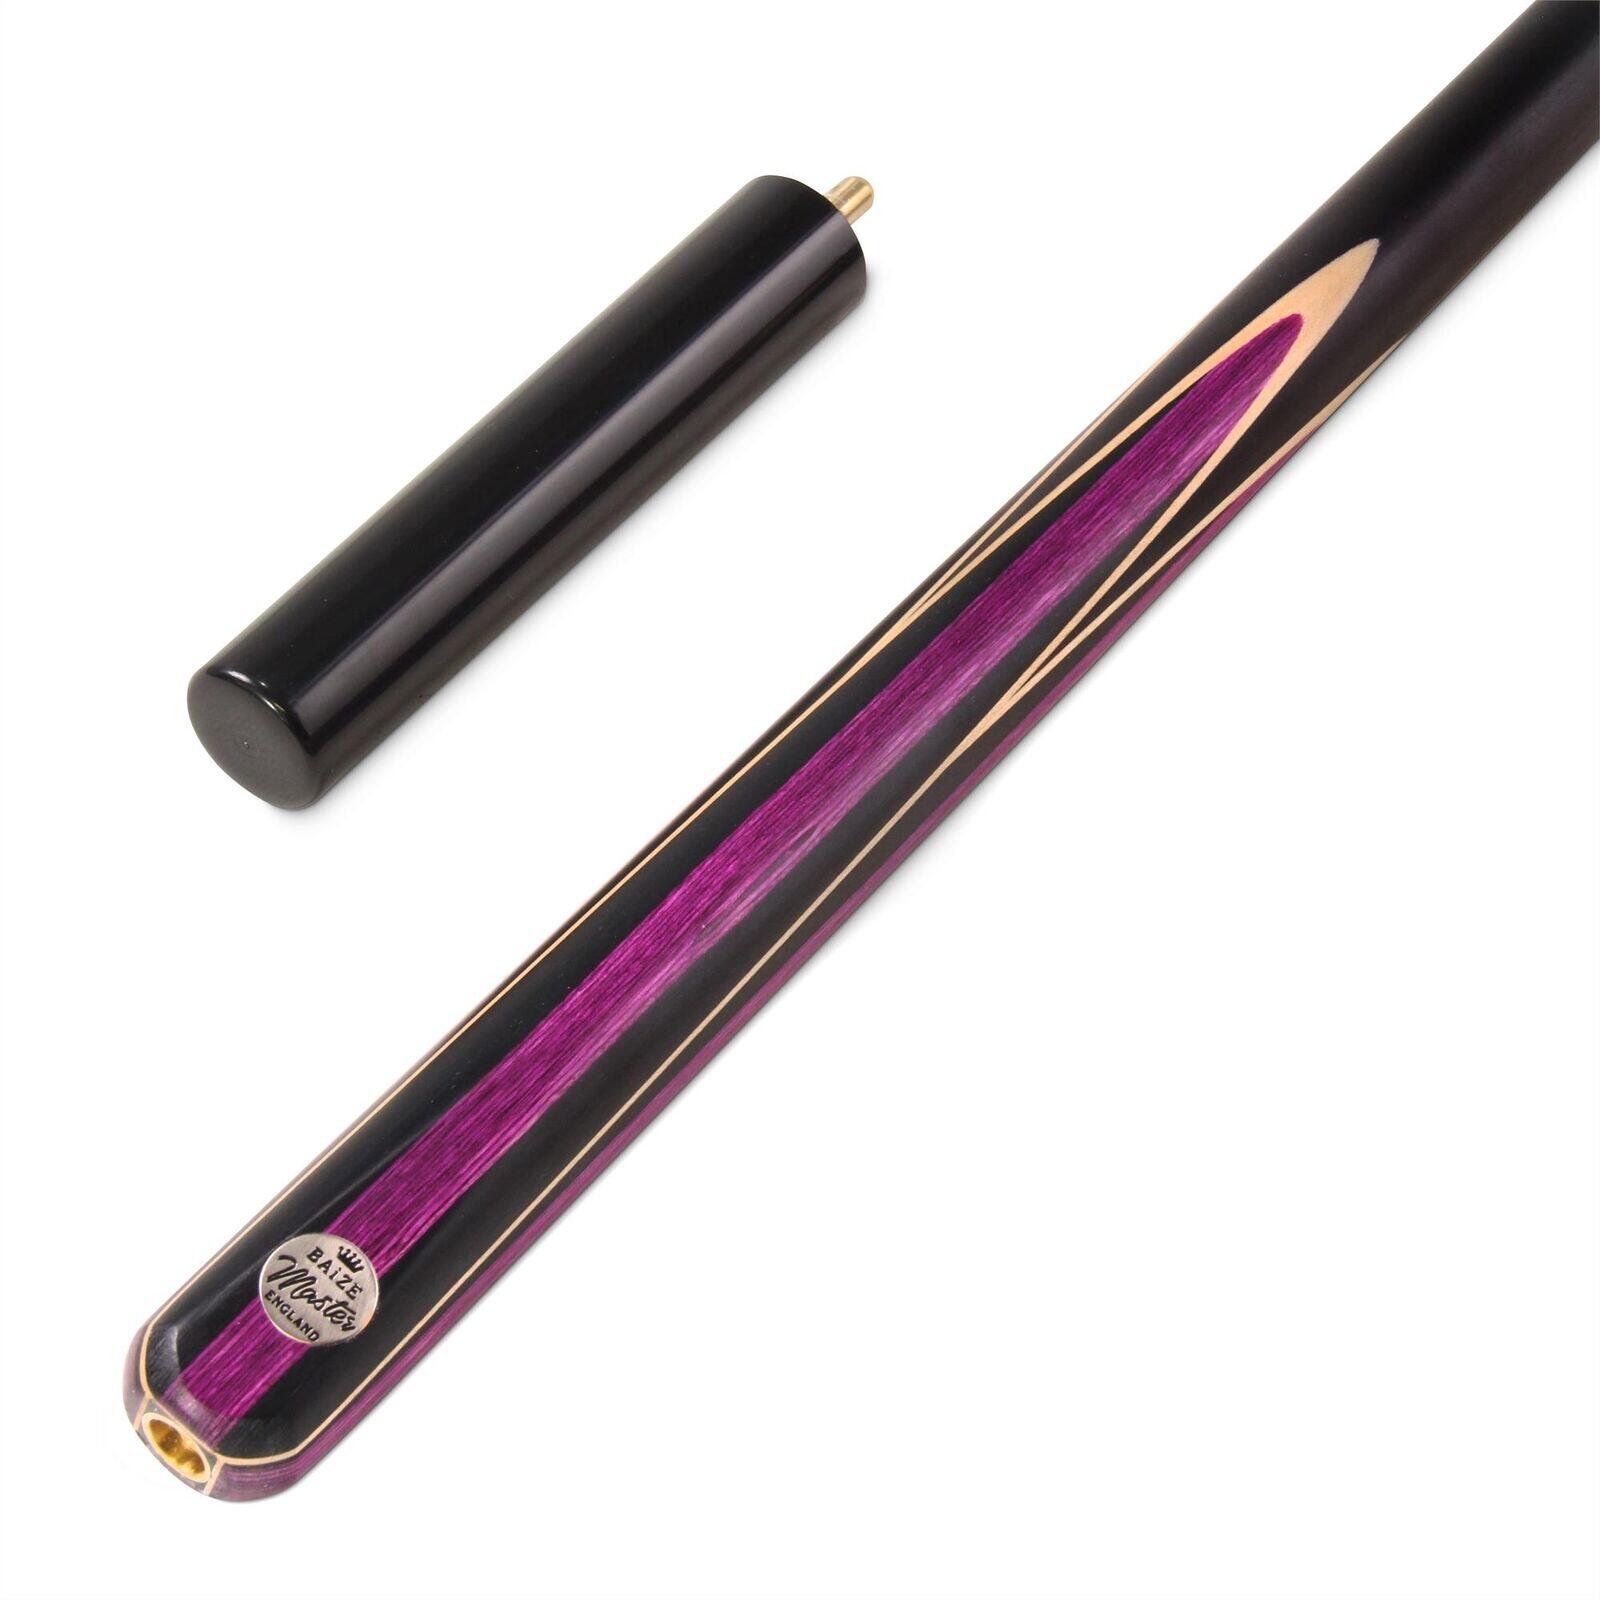 Baize Master PURPLE JESTER 58 Inch 1 Piece Ash Snooker Pool Cue with 9.75mm Tip 1/5